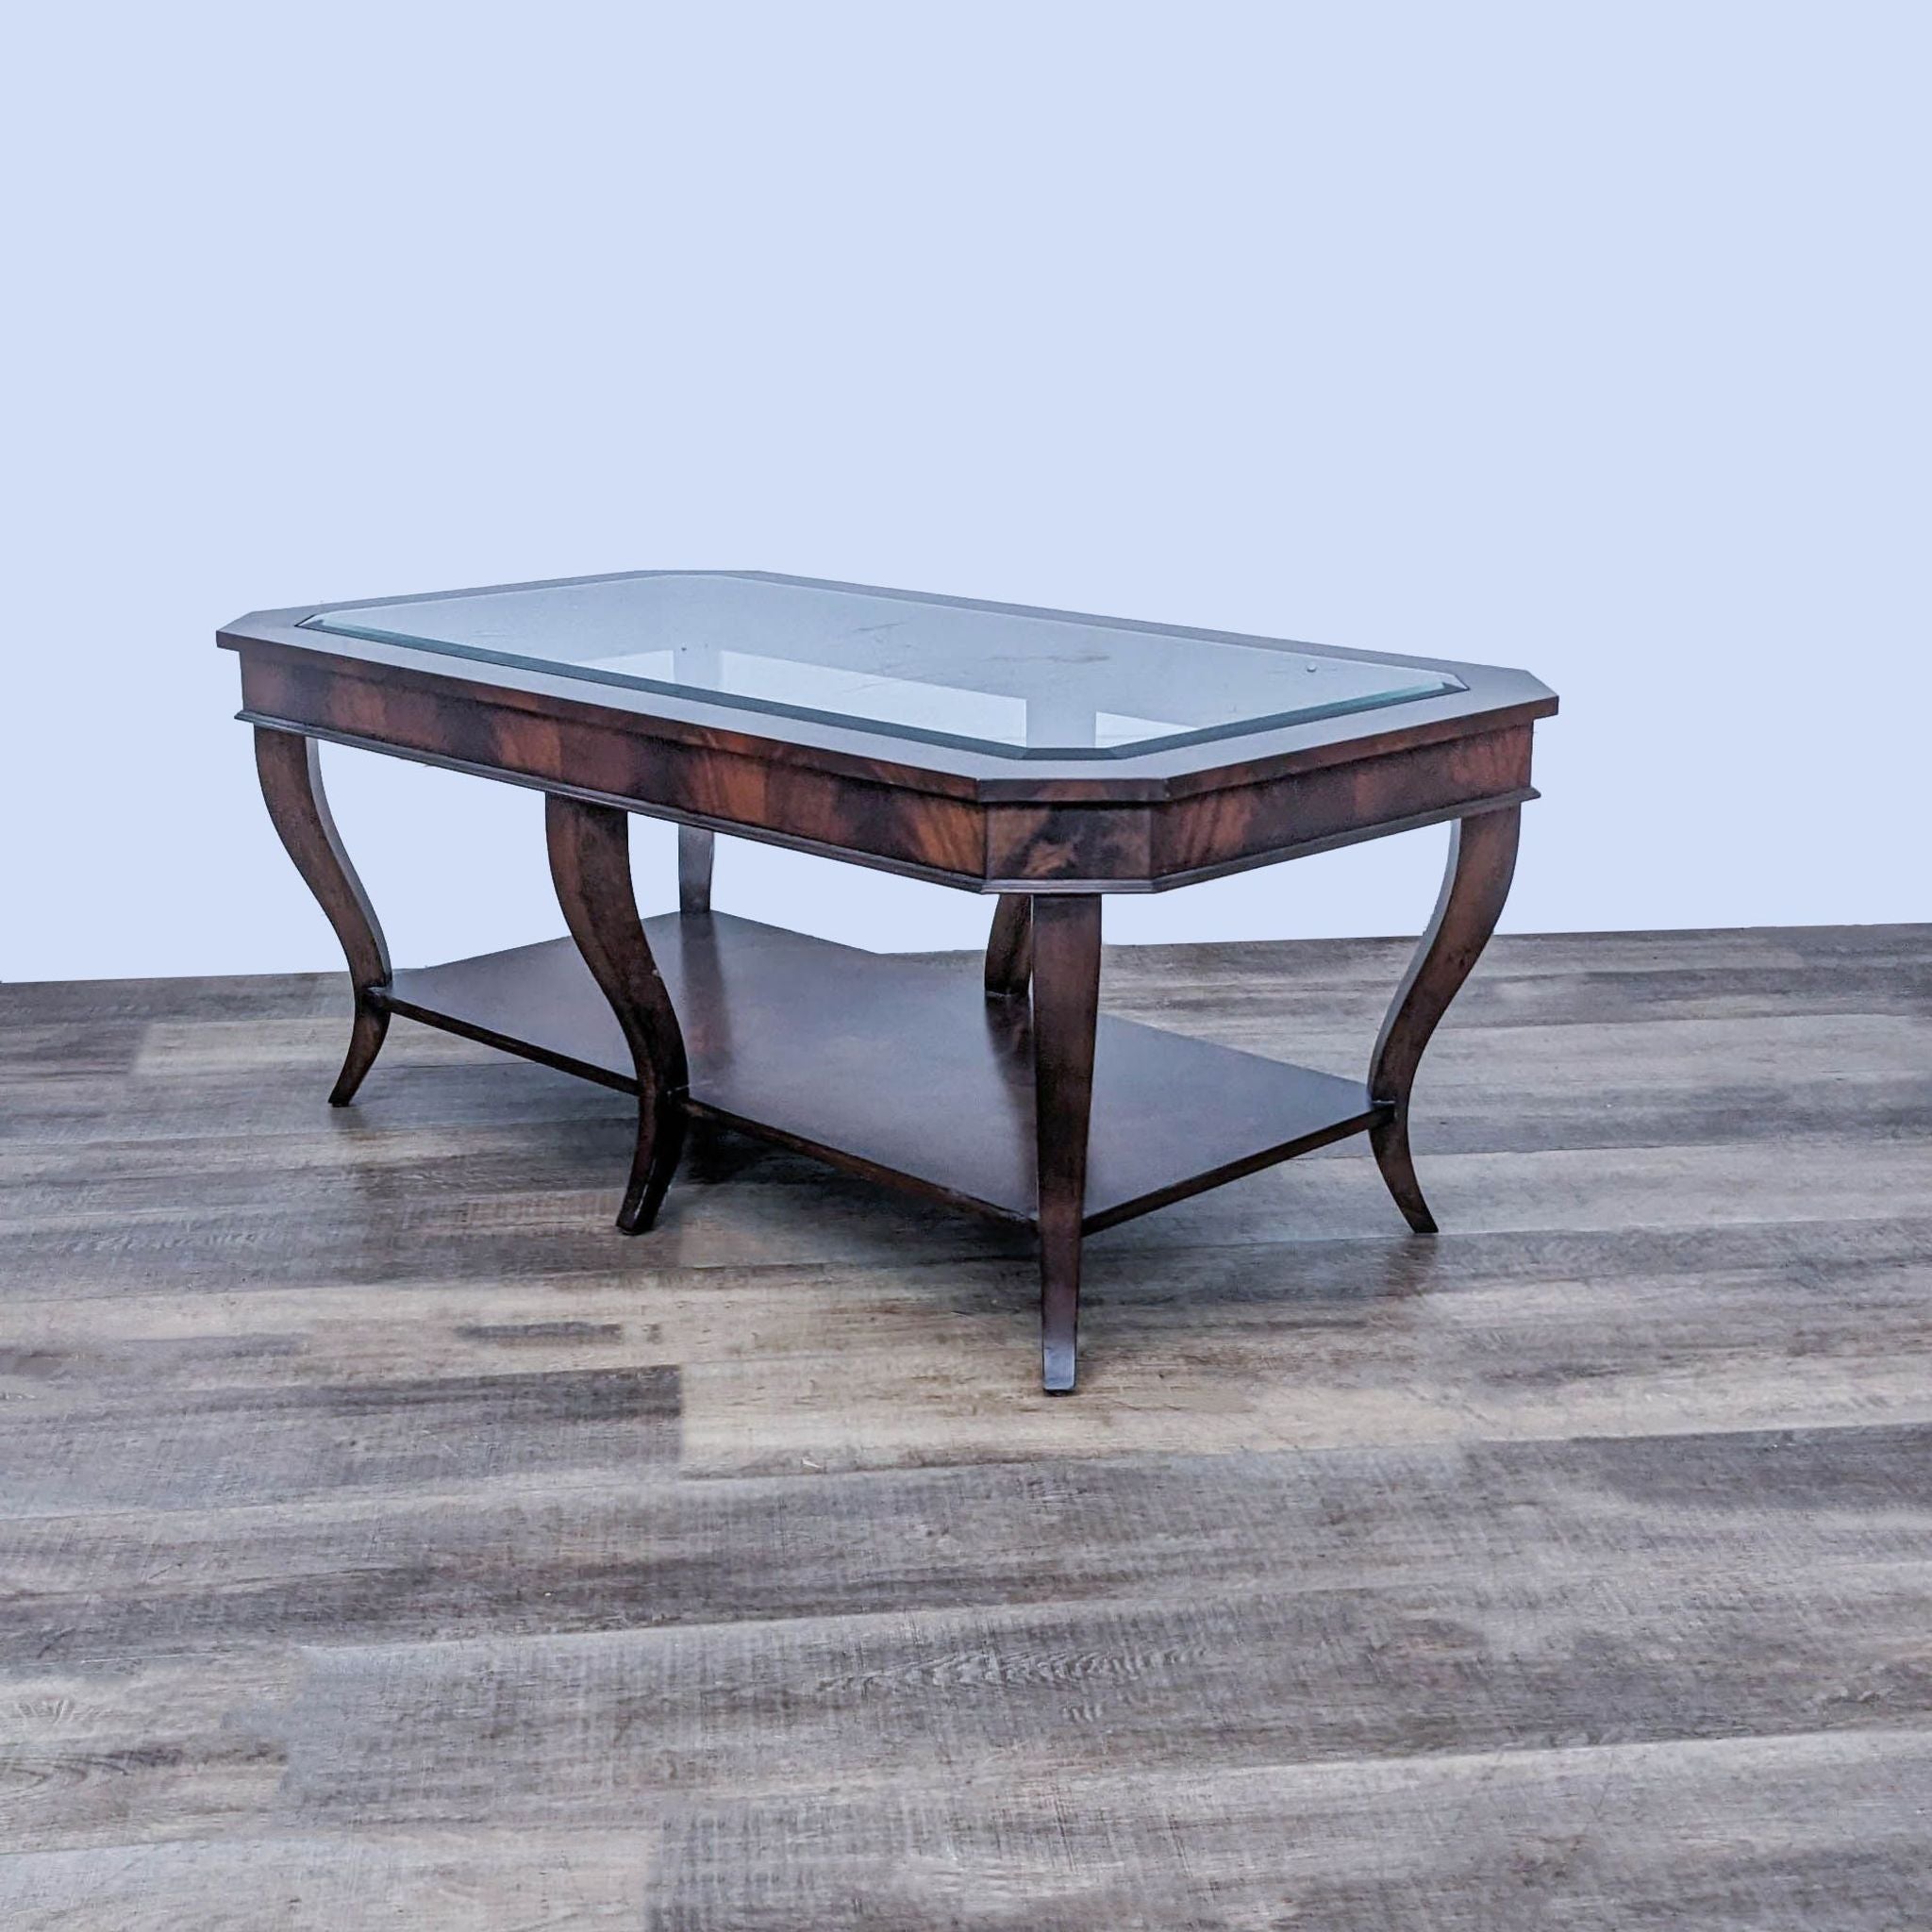 Rectangular Ethan Allen coffee table featuring mahogany finish, glass insert top, and elegant cabriole legs.